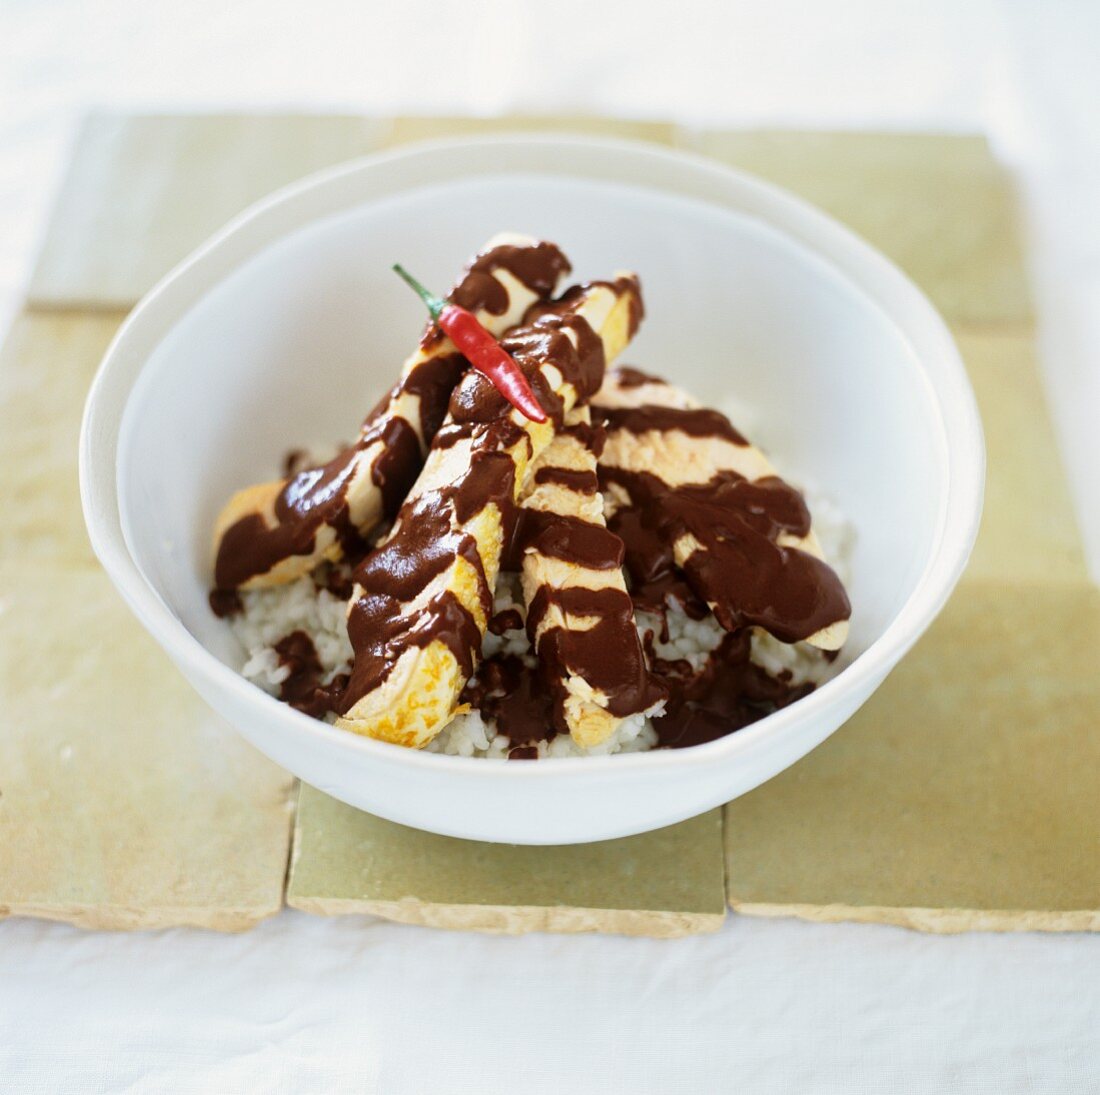 Chicken strips with chocolate sauce (South America)